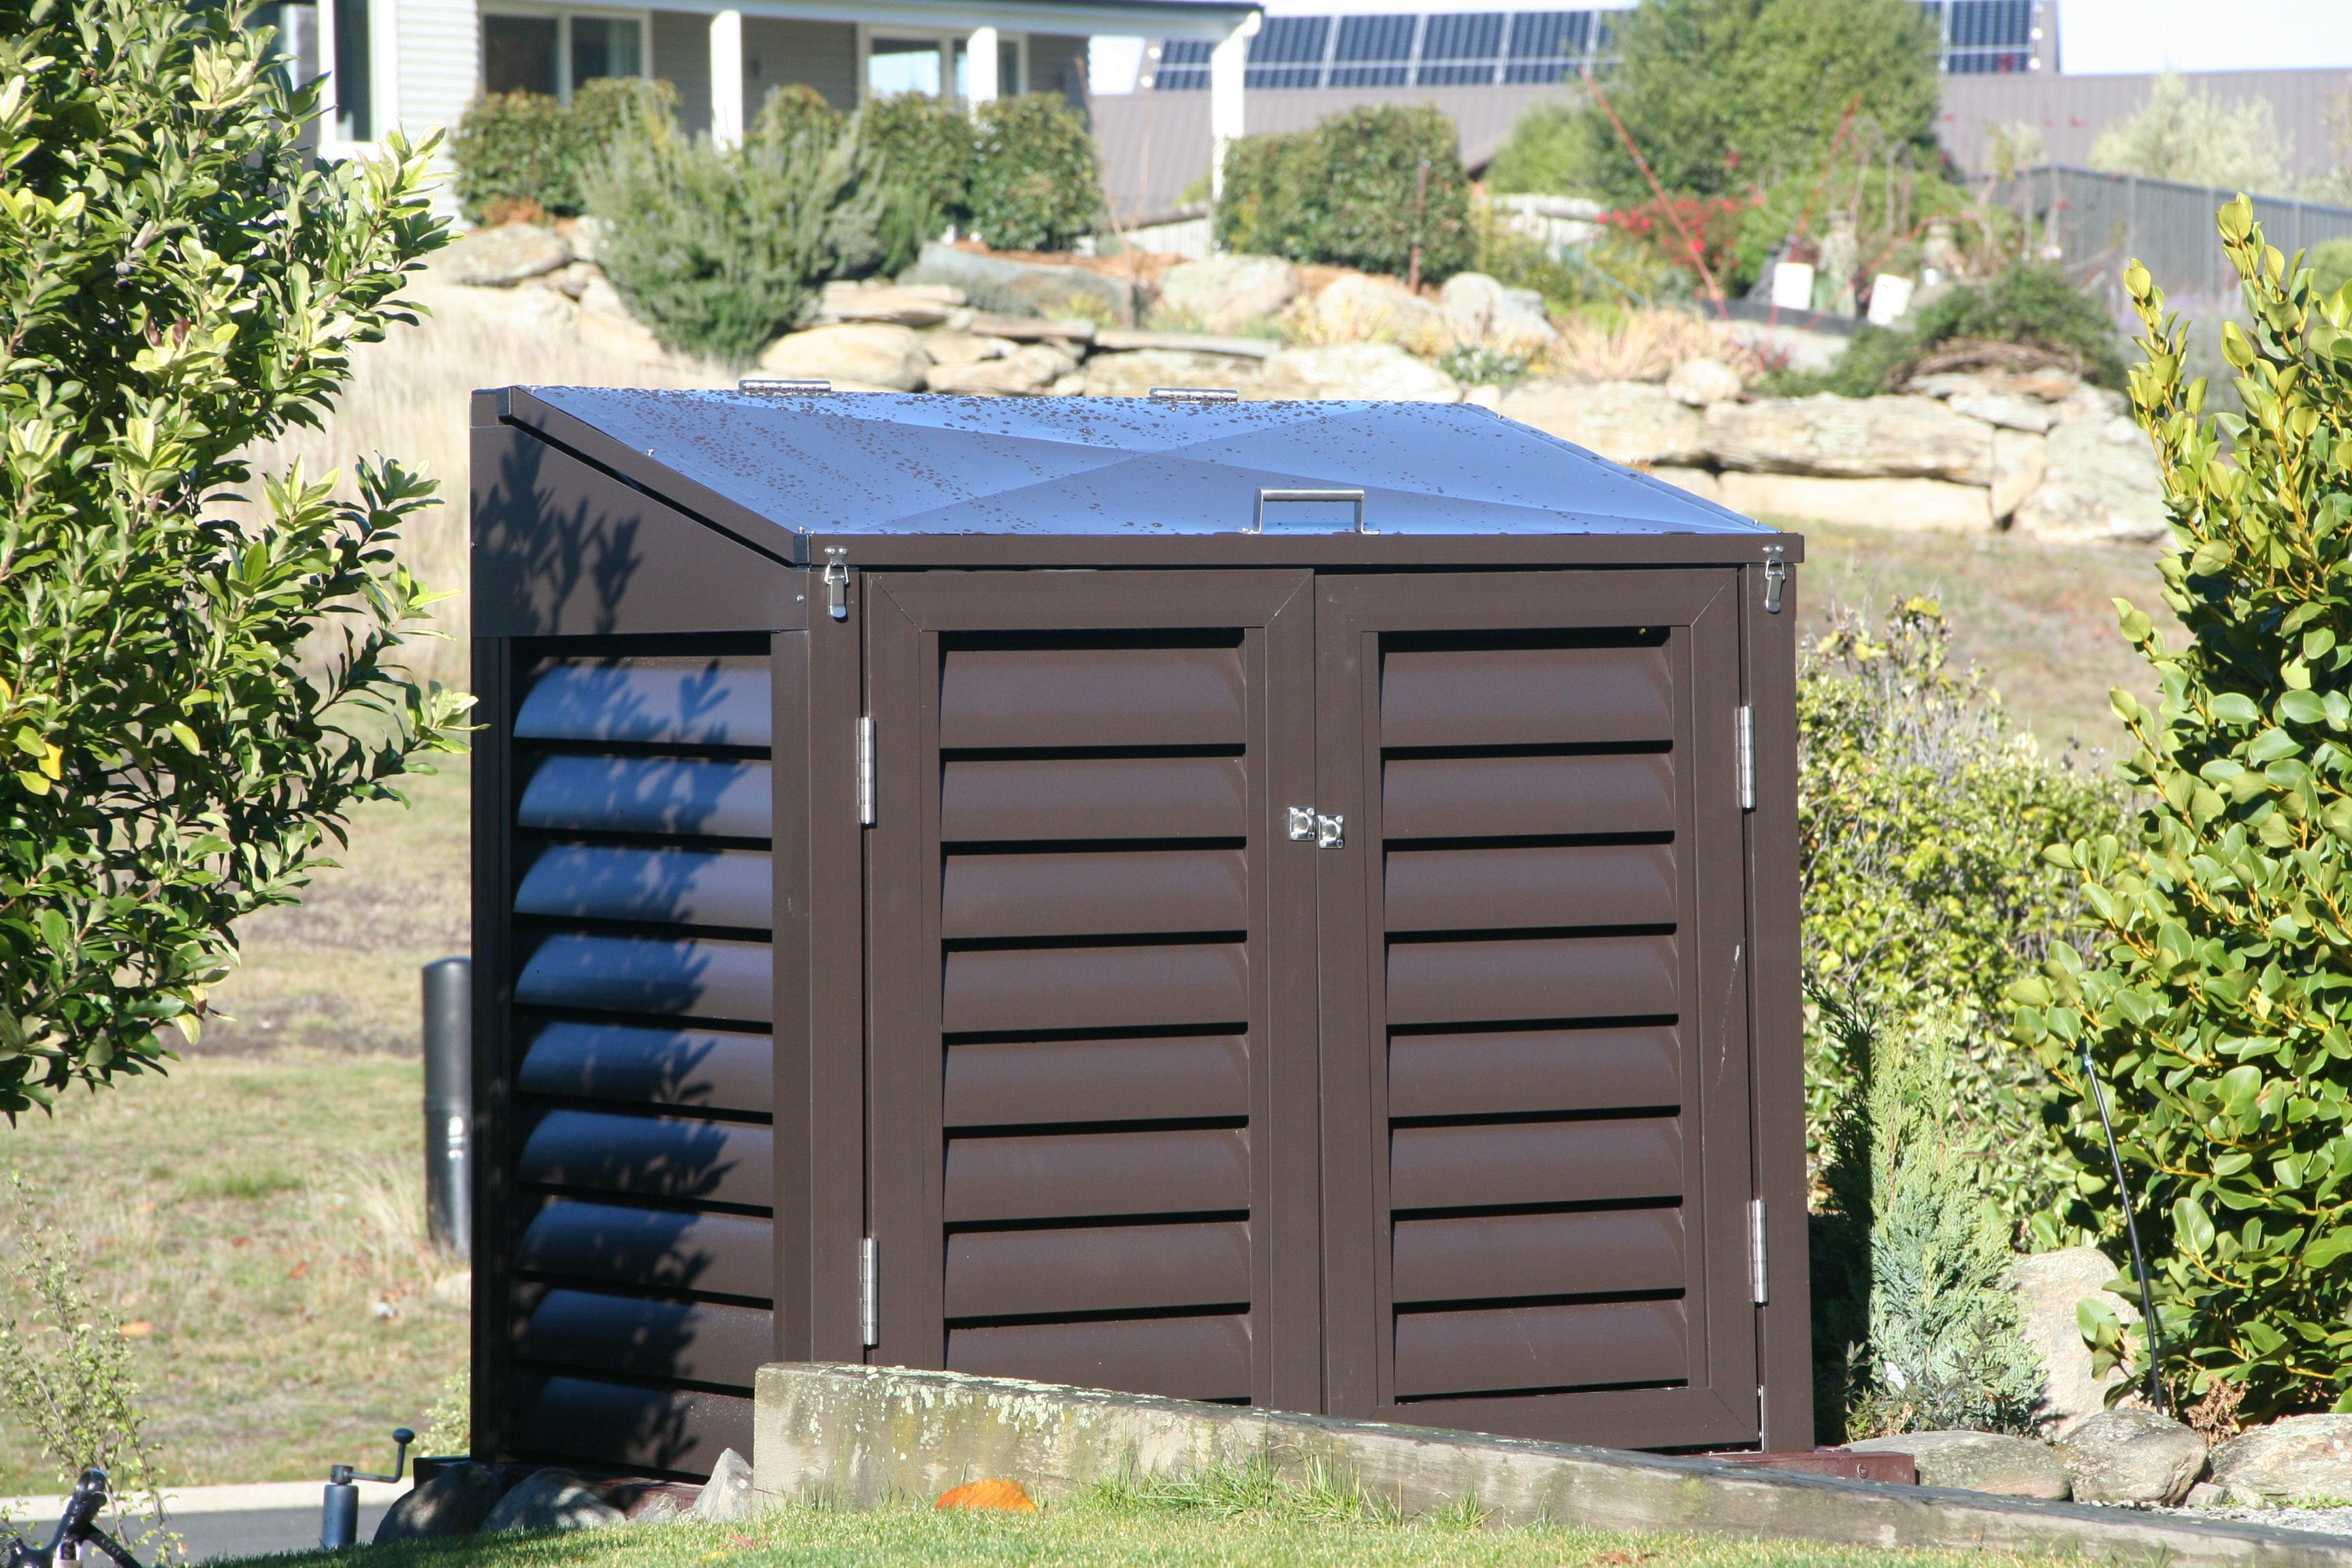 Wheelie Bin Garbage Or Rubbish Bin Storage Shed Designed Of with proportions 3456 X 2304